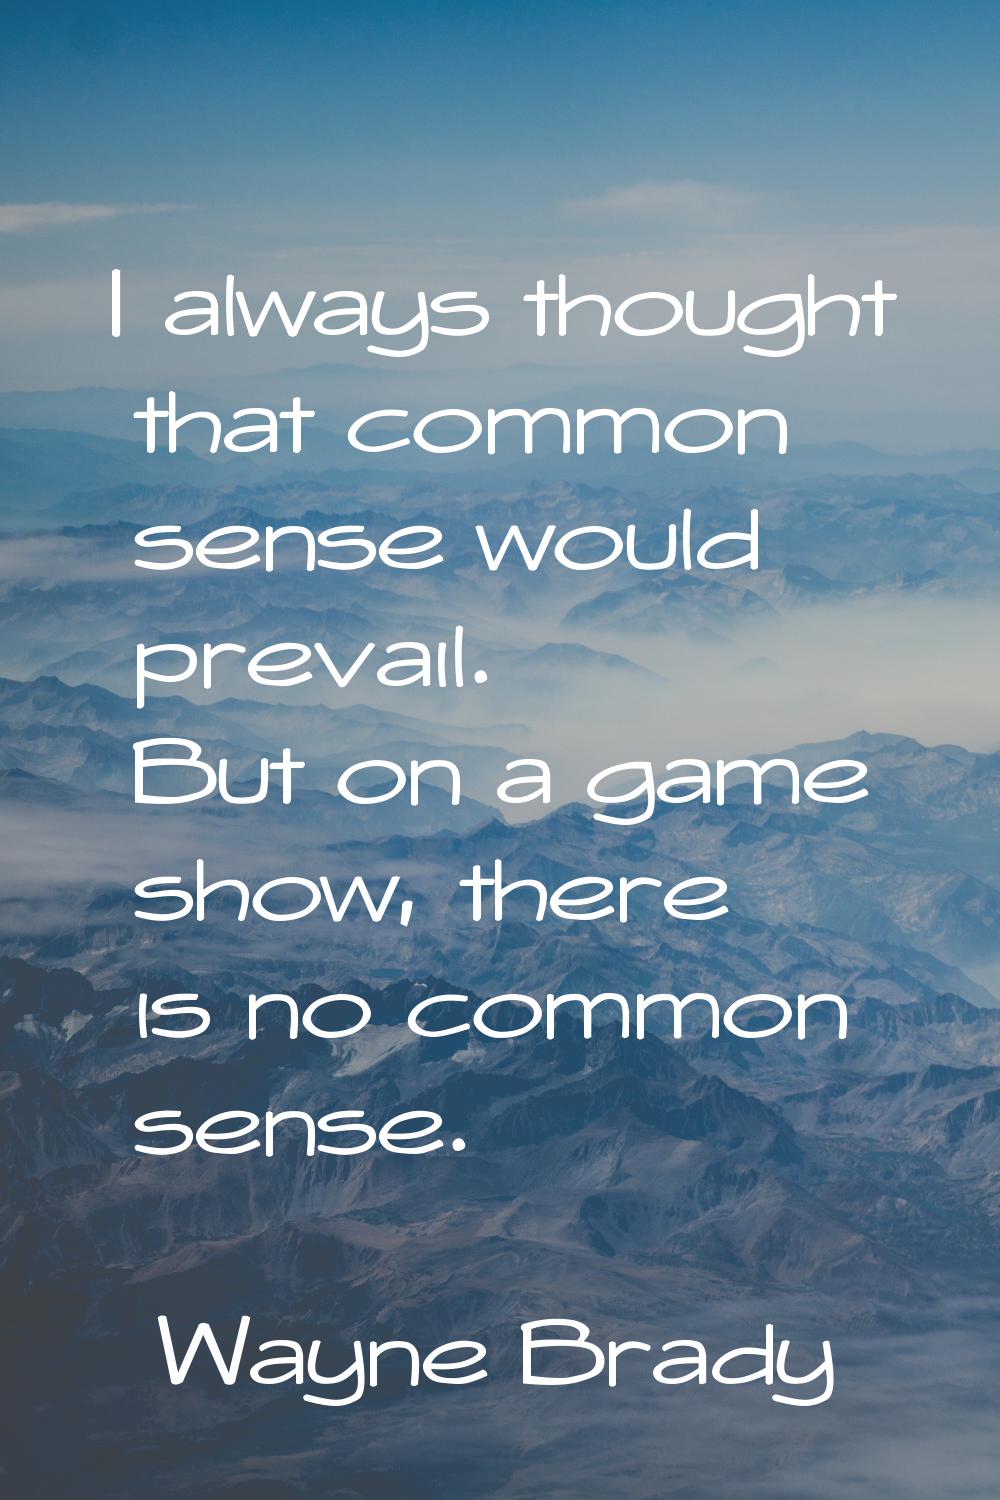 I always thought that common sense would prevail. But on a game show, there is no common sense.